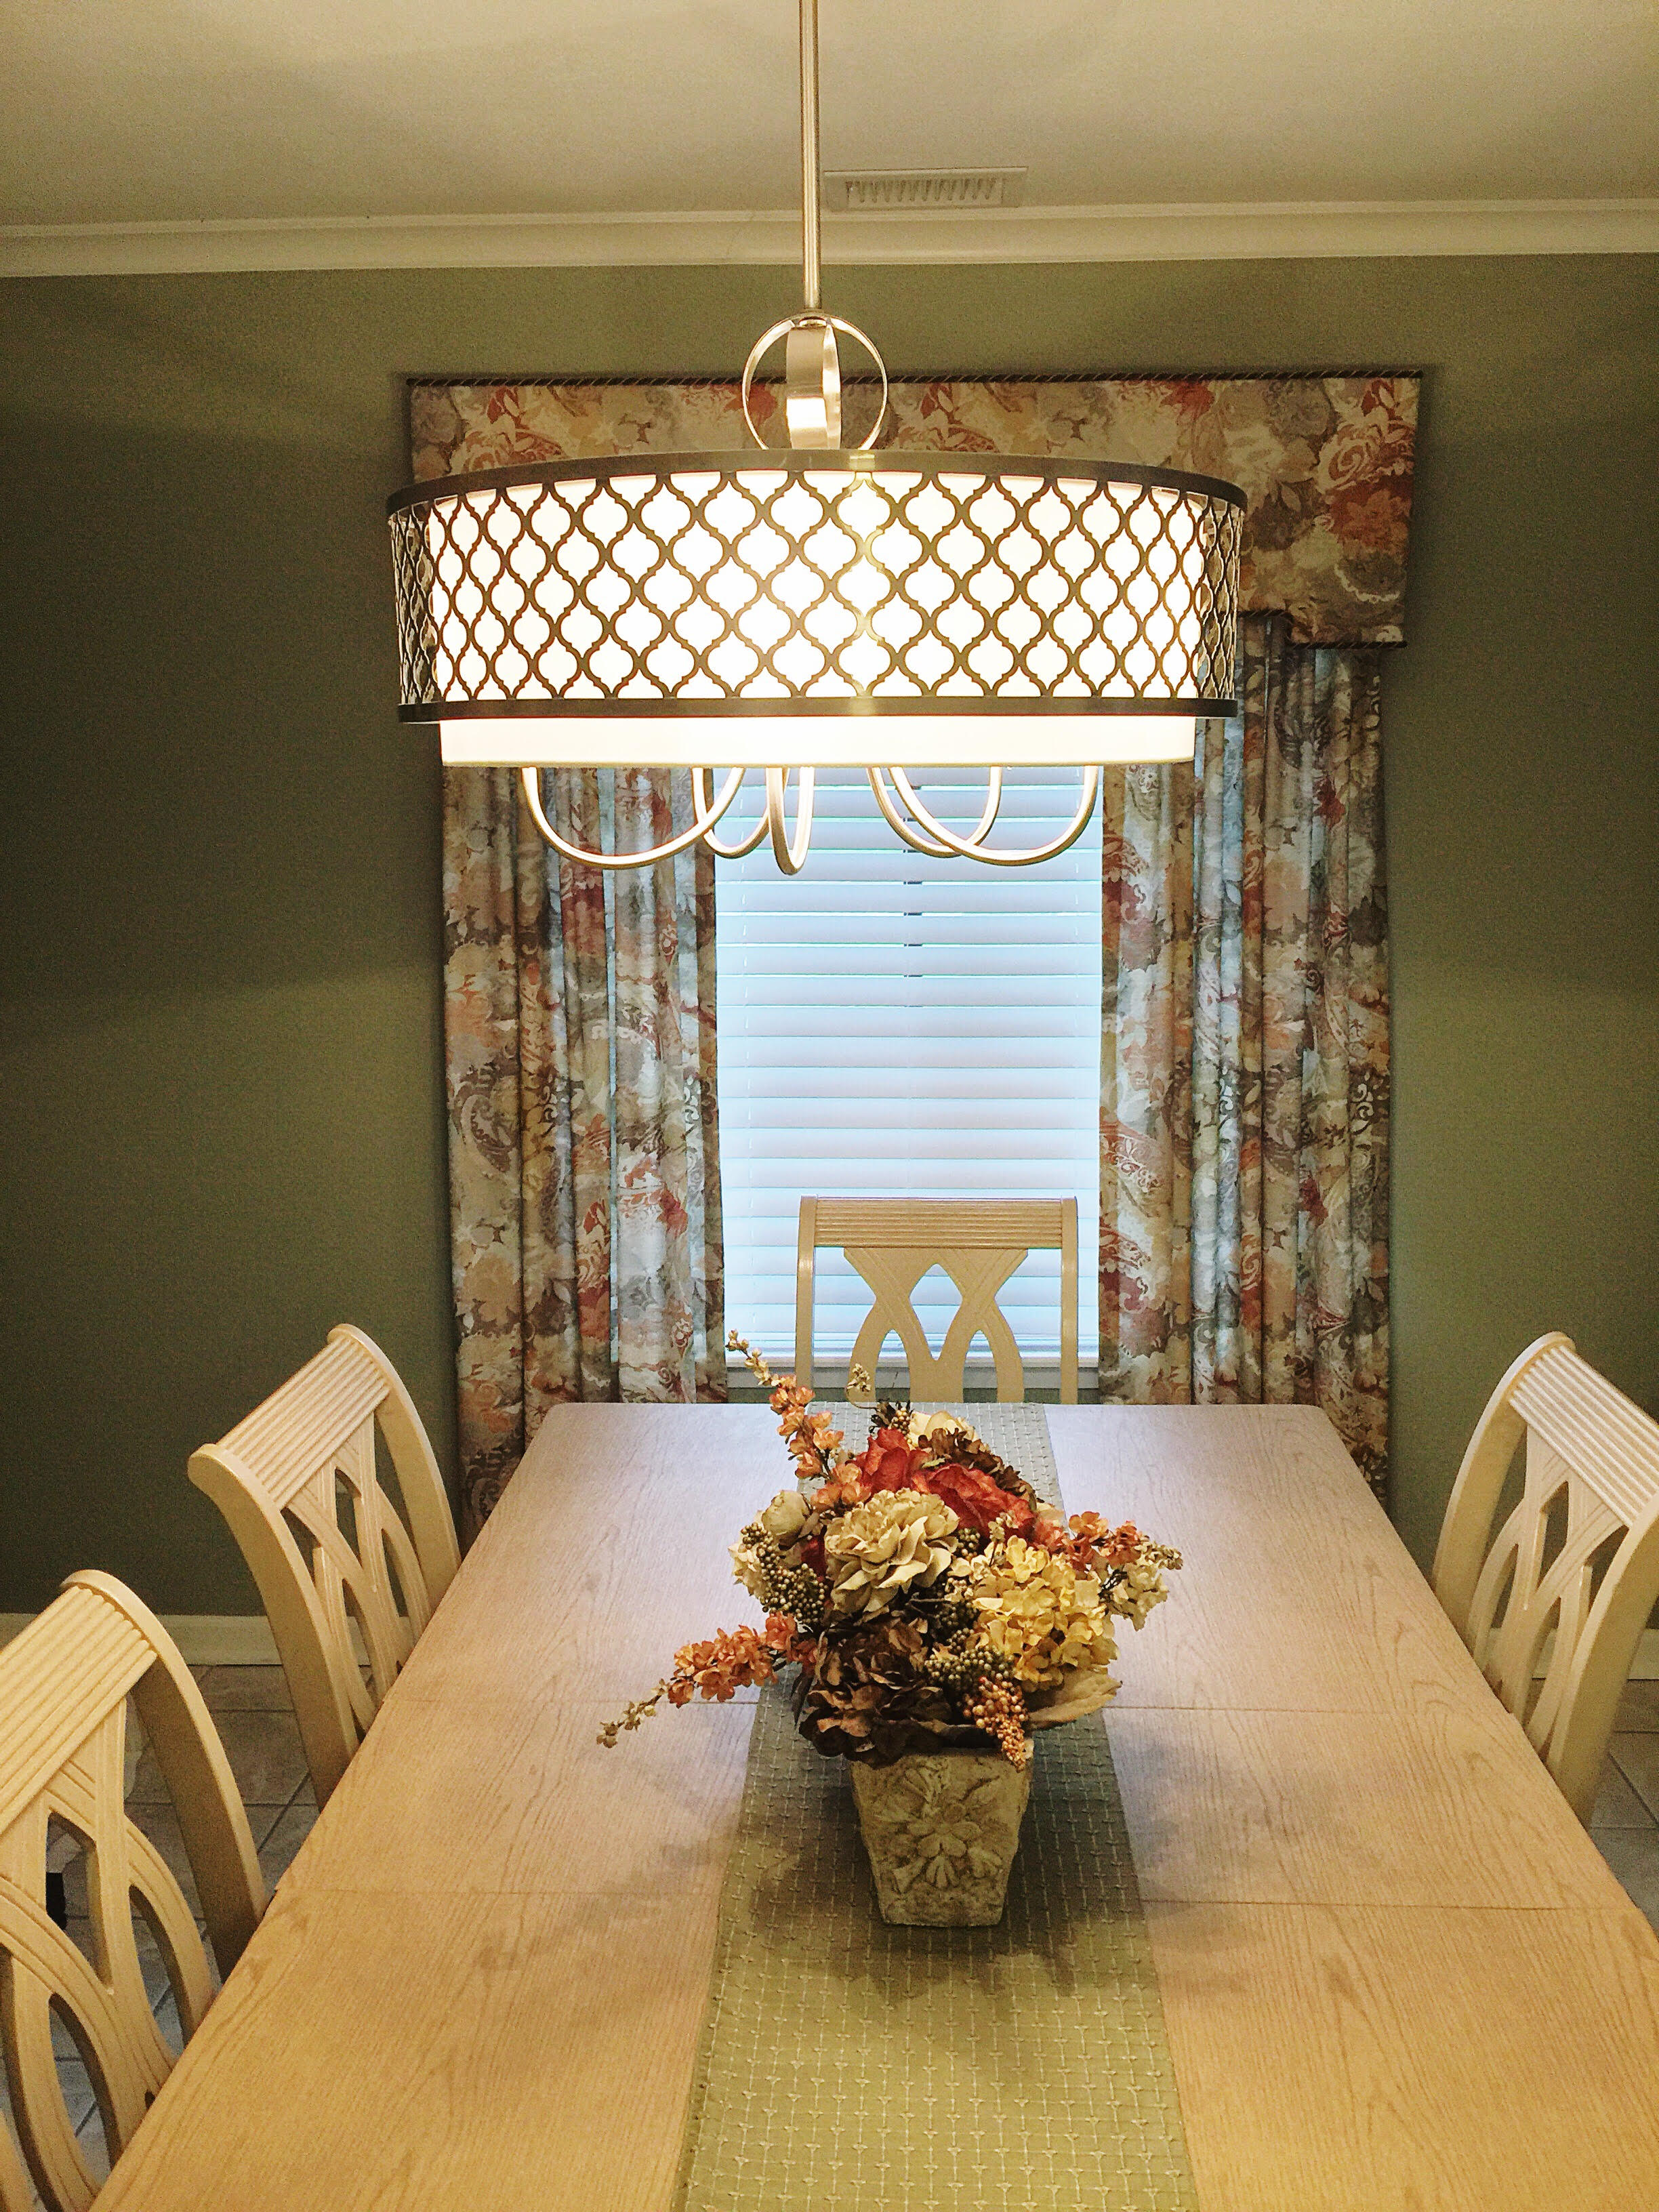   Added new table top, lighting, floral arrangement &amp; wall accessories.  